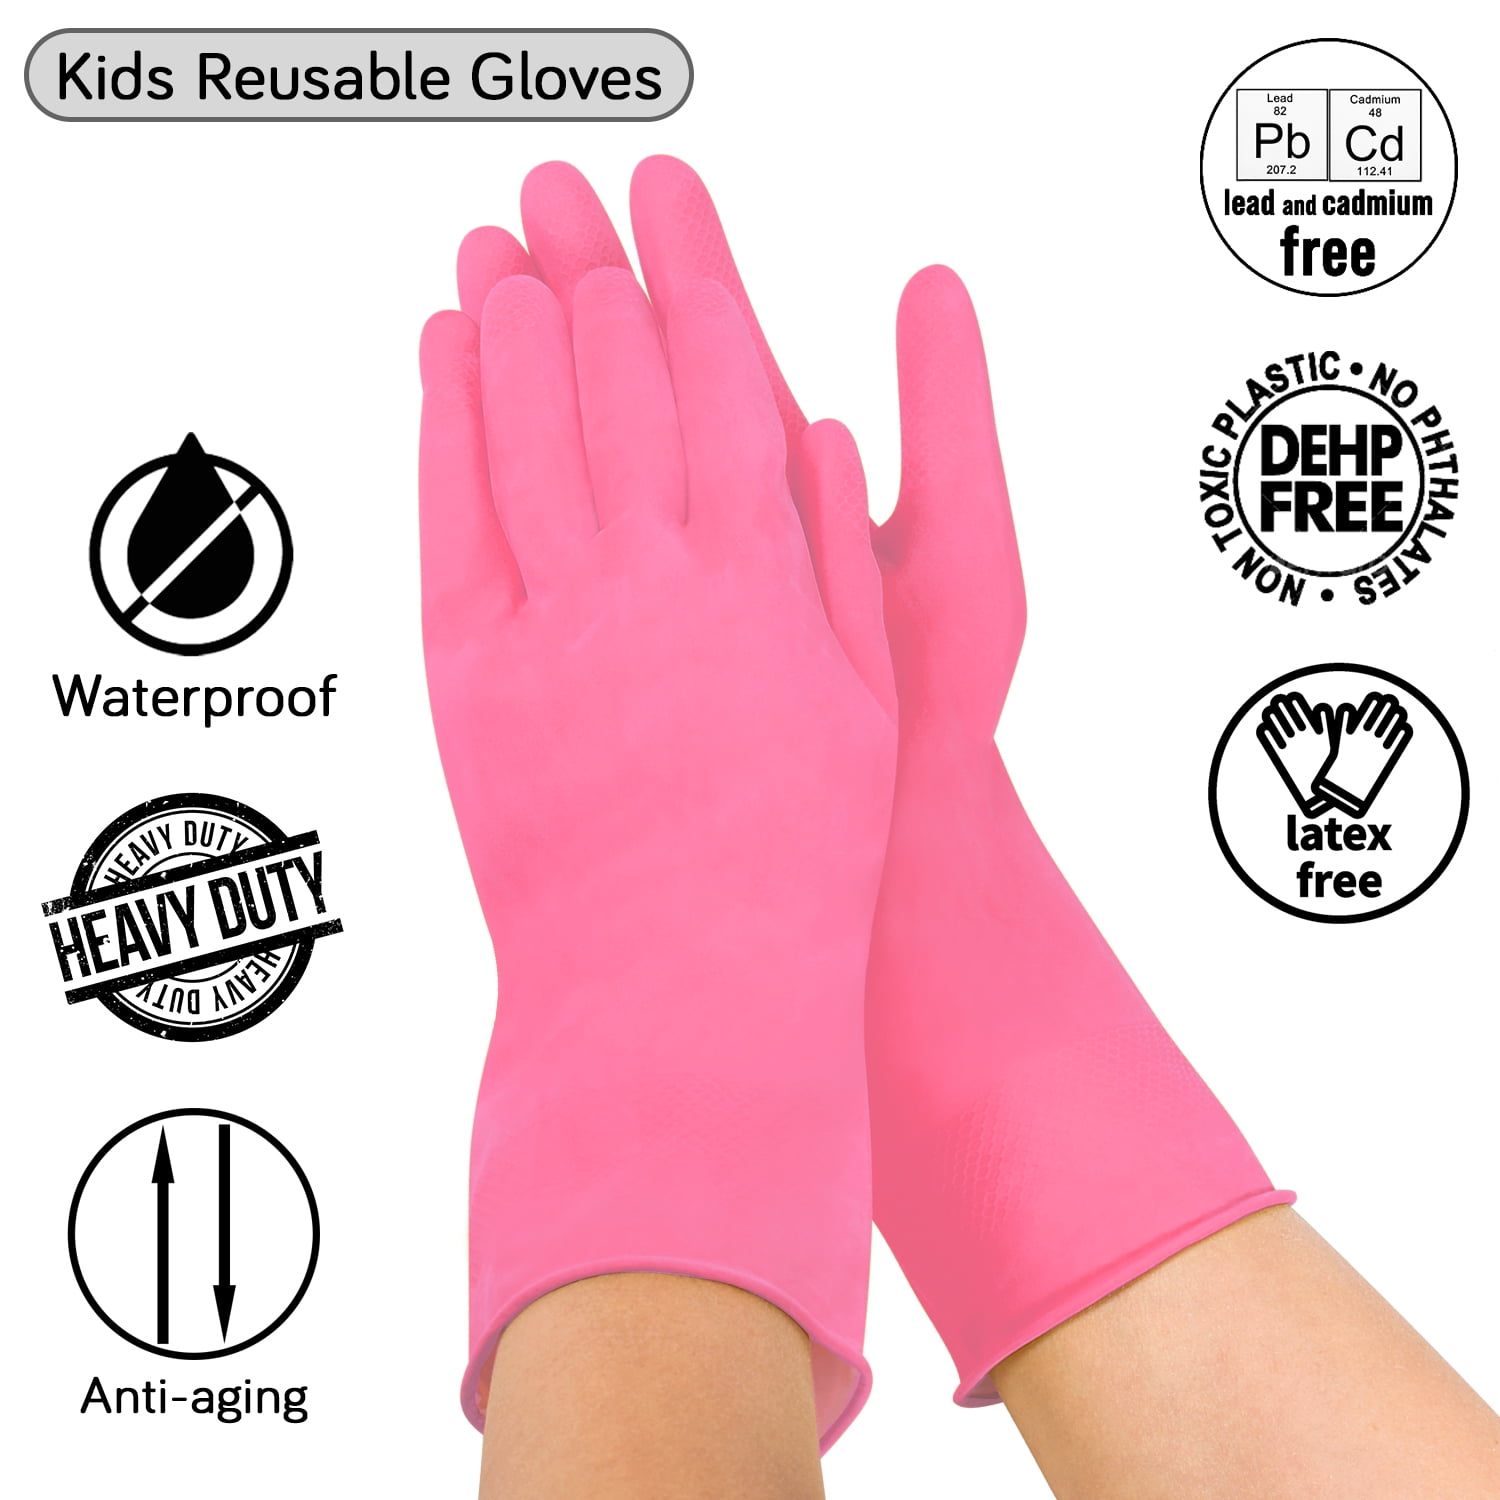 12 Pairs] Dishwashing Gloves - 11.6 Inches Kids Rubber Gloves, Pink Flock  Lined Heavy Duty Kitchen Gloves, Teen Long Dish Glove for Cleaning the  Home, Pet Care Household, Painting, Medical, Gardening 